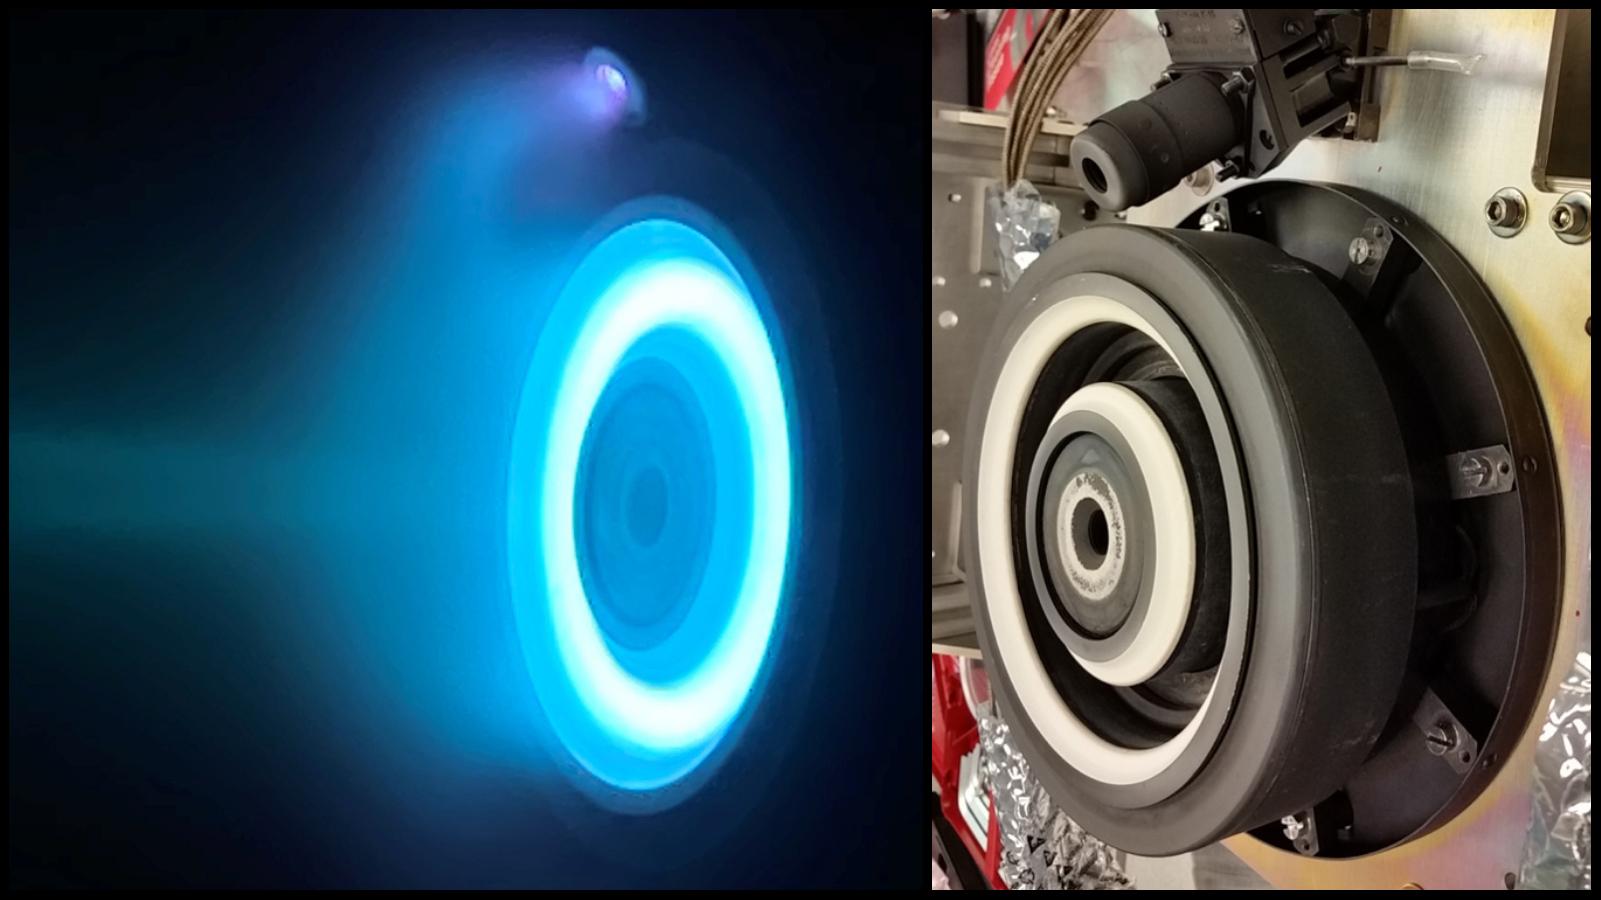 left image shows the thruster glowing blue as it emits plasma. The right image shows the thruster when it is not operating.